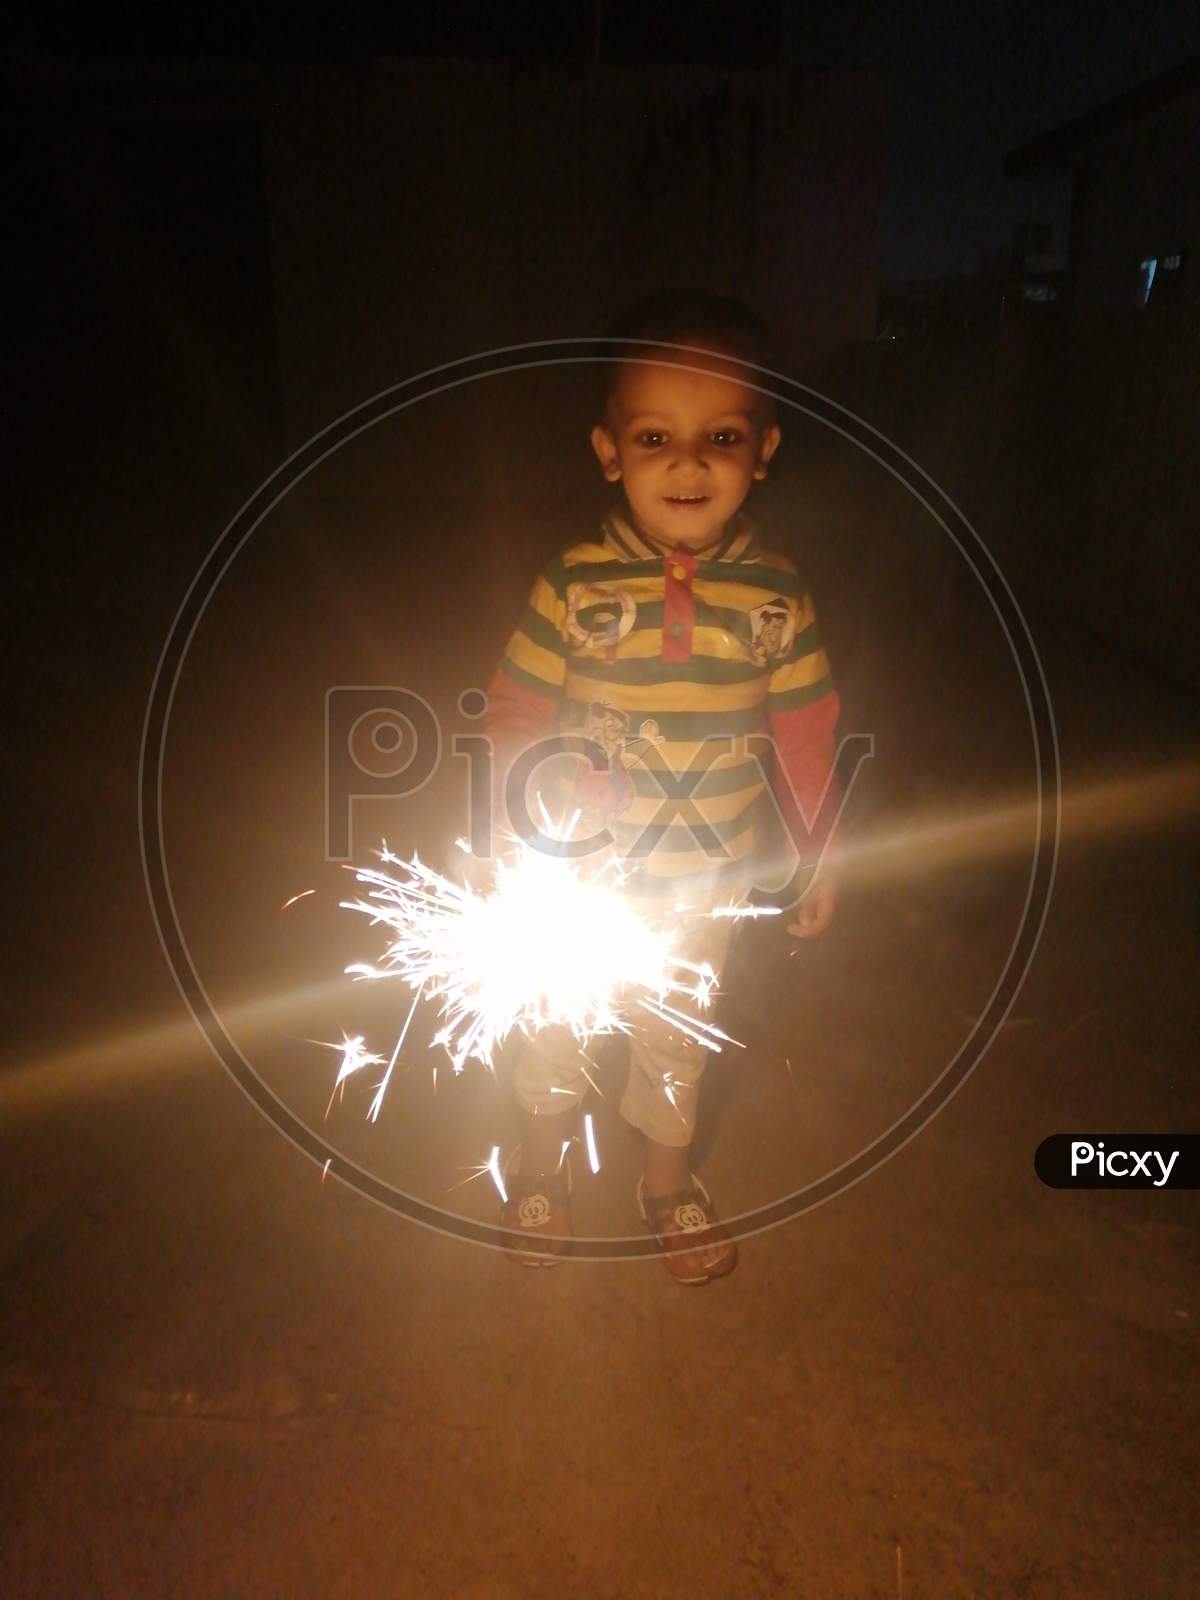 A little kid playing with sparkler